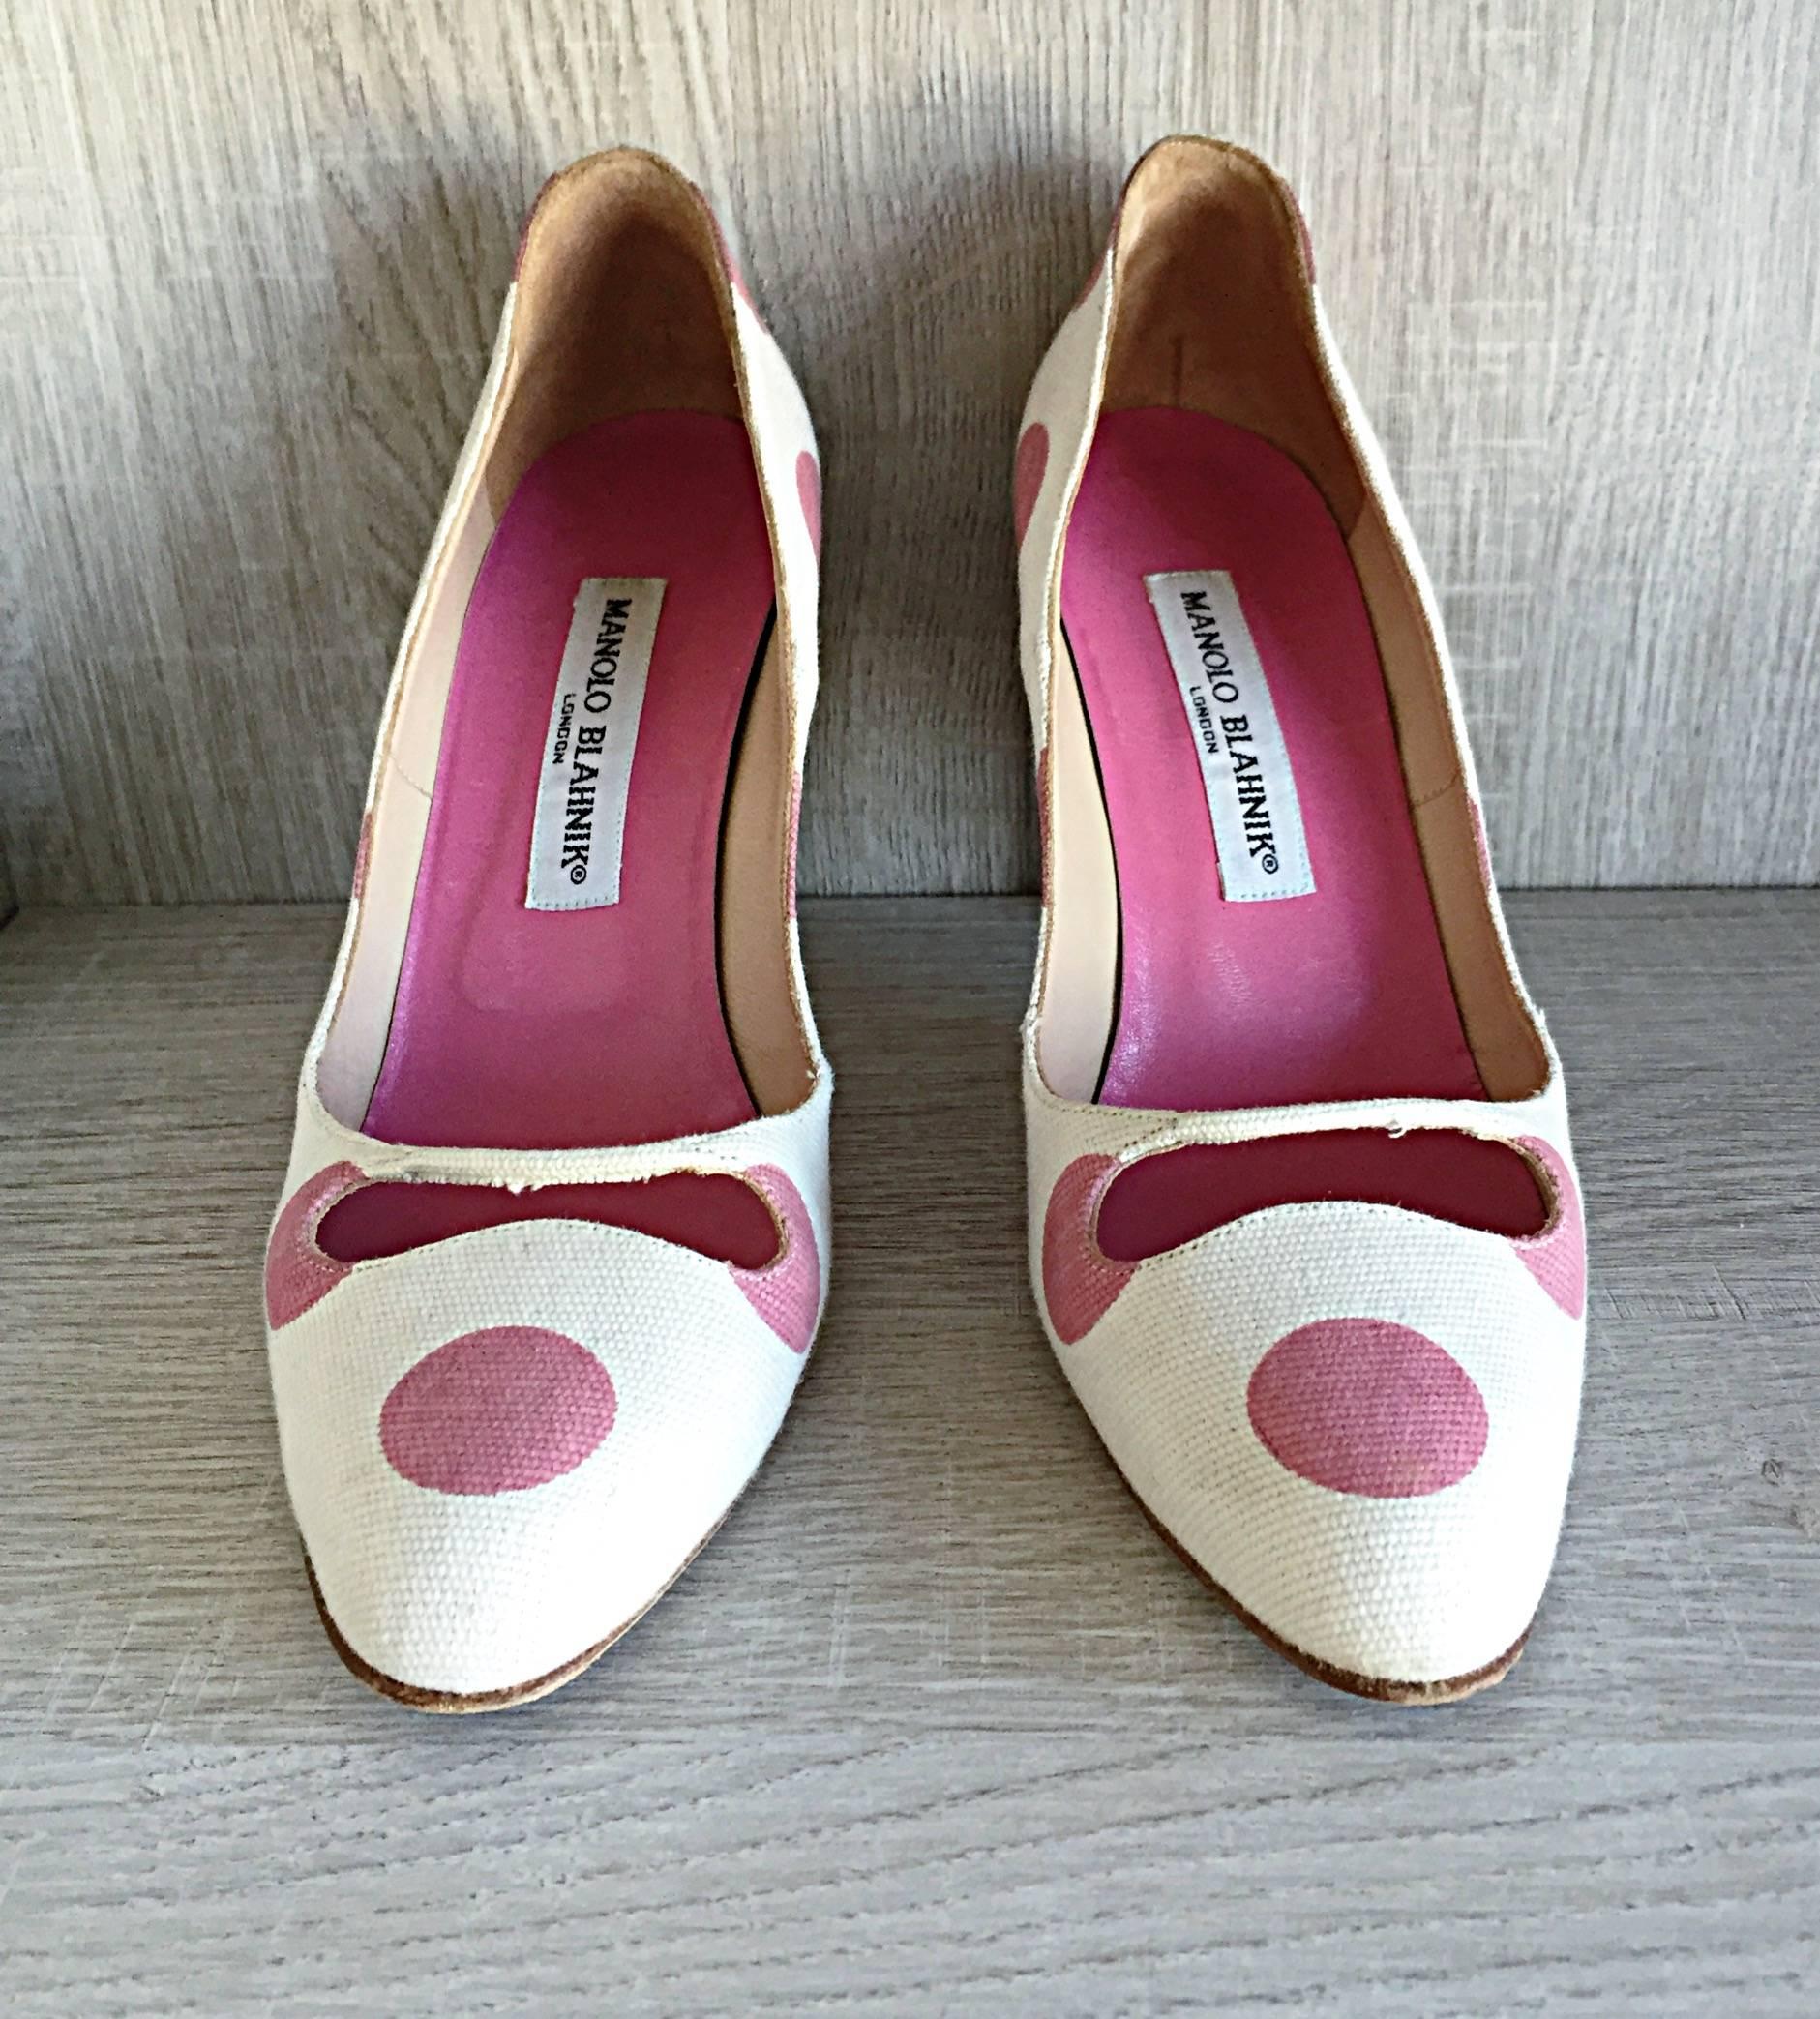 Gray Manolo Blahnik Size 38.5 / 8.5 Pink and White Polka Dot Cut - Out Heels Pumps For Sale